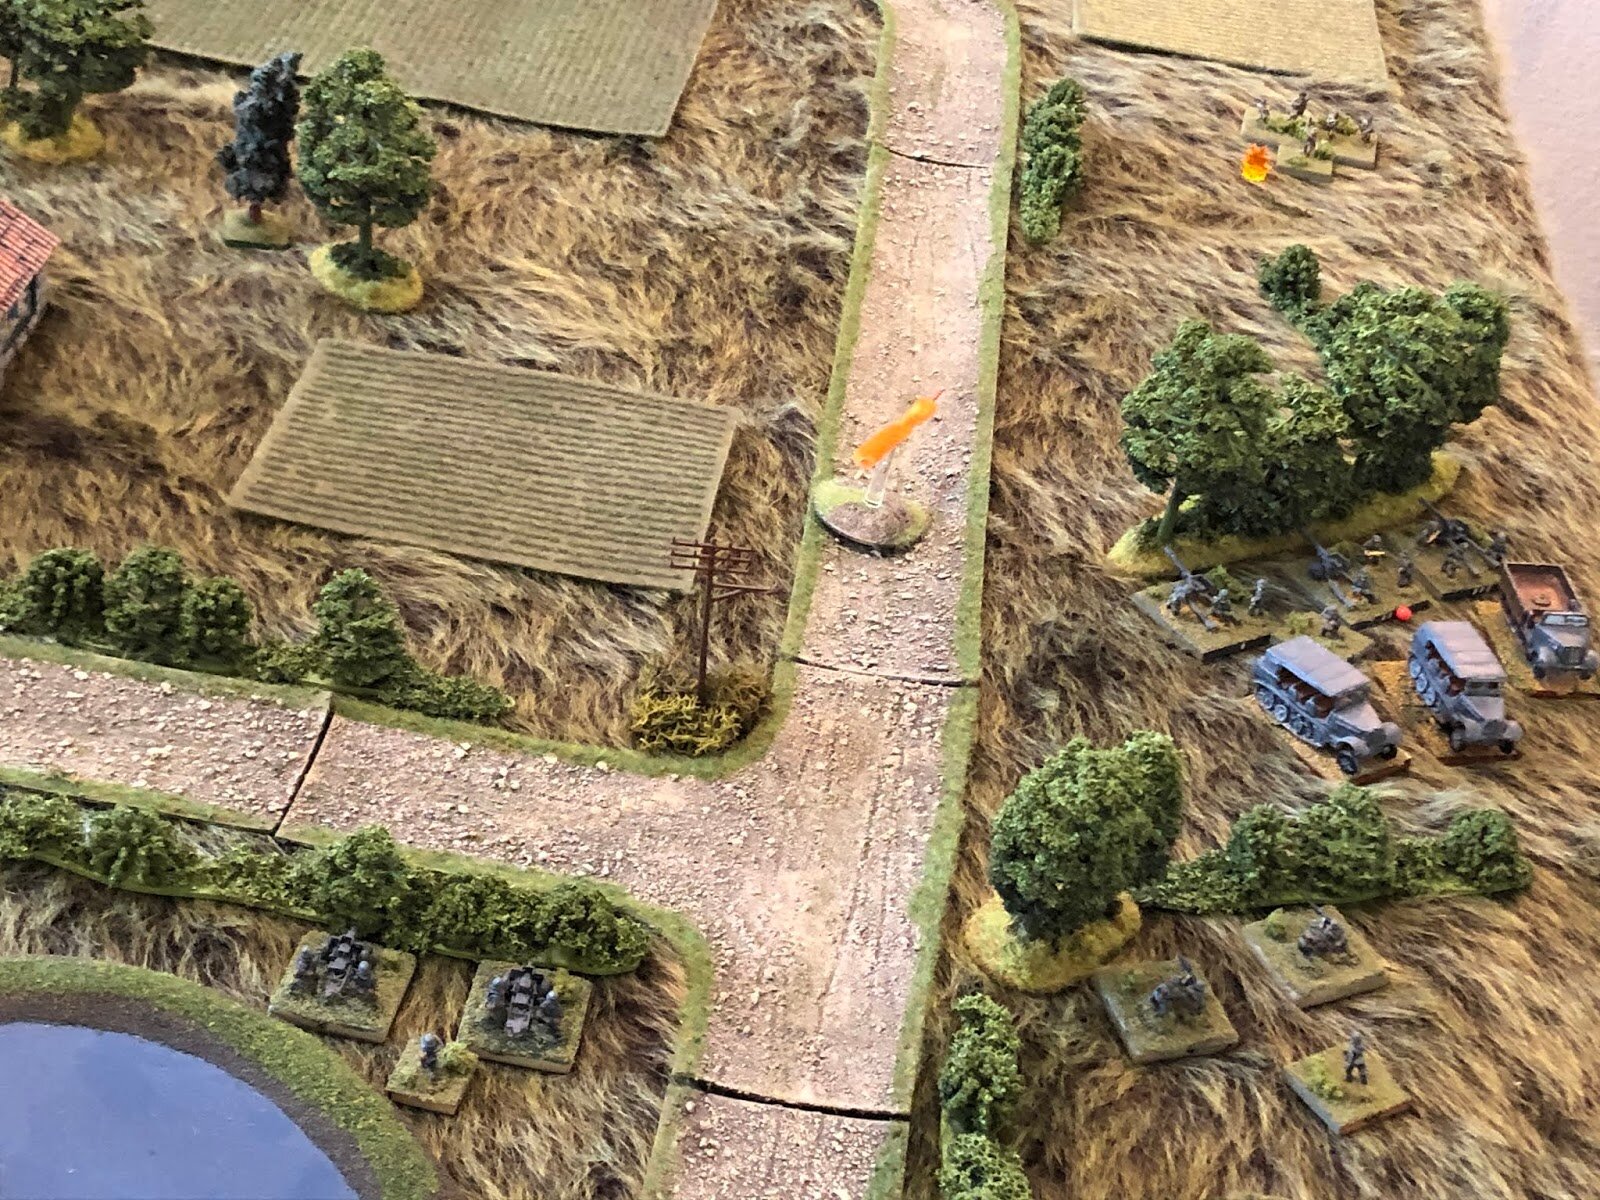  Staying on the German right, the IG Plt continues to work out (bottom left), now sighting in on the encroaching Soviet 1st Plt PC and his 1st Squad...  